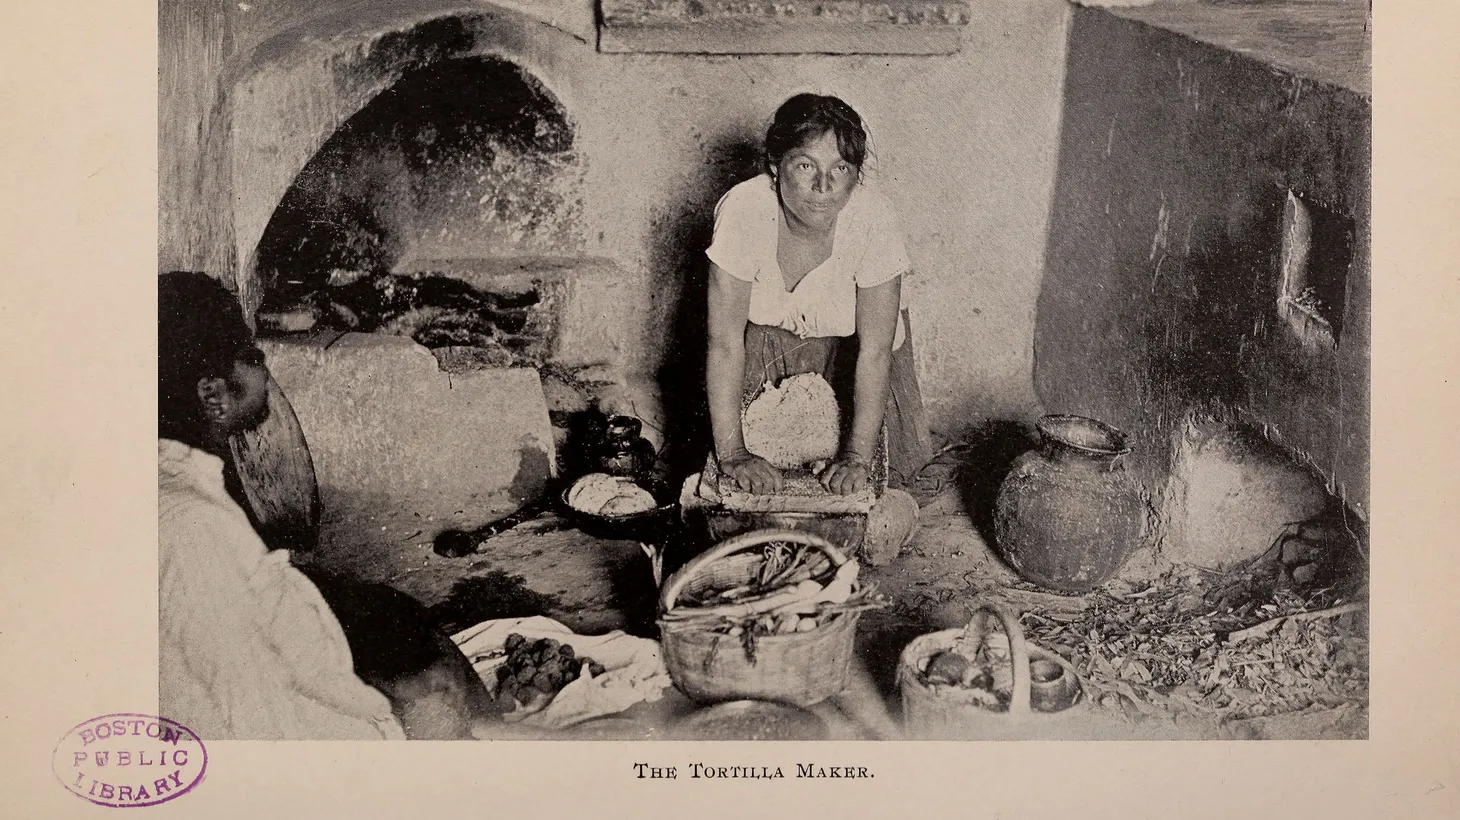 Lummis’ The Landmarks Club Cook Book, a 1903 collection of recipes published to help repair the Missions and that includes some of the earliest English-language recipes for Mexican food, featured a photo of a tortillera working with her rolling pin with the caption "The Tortilla Maker."